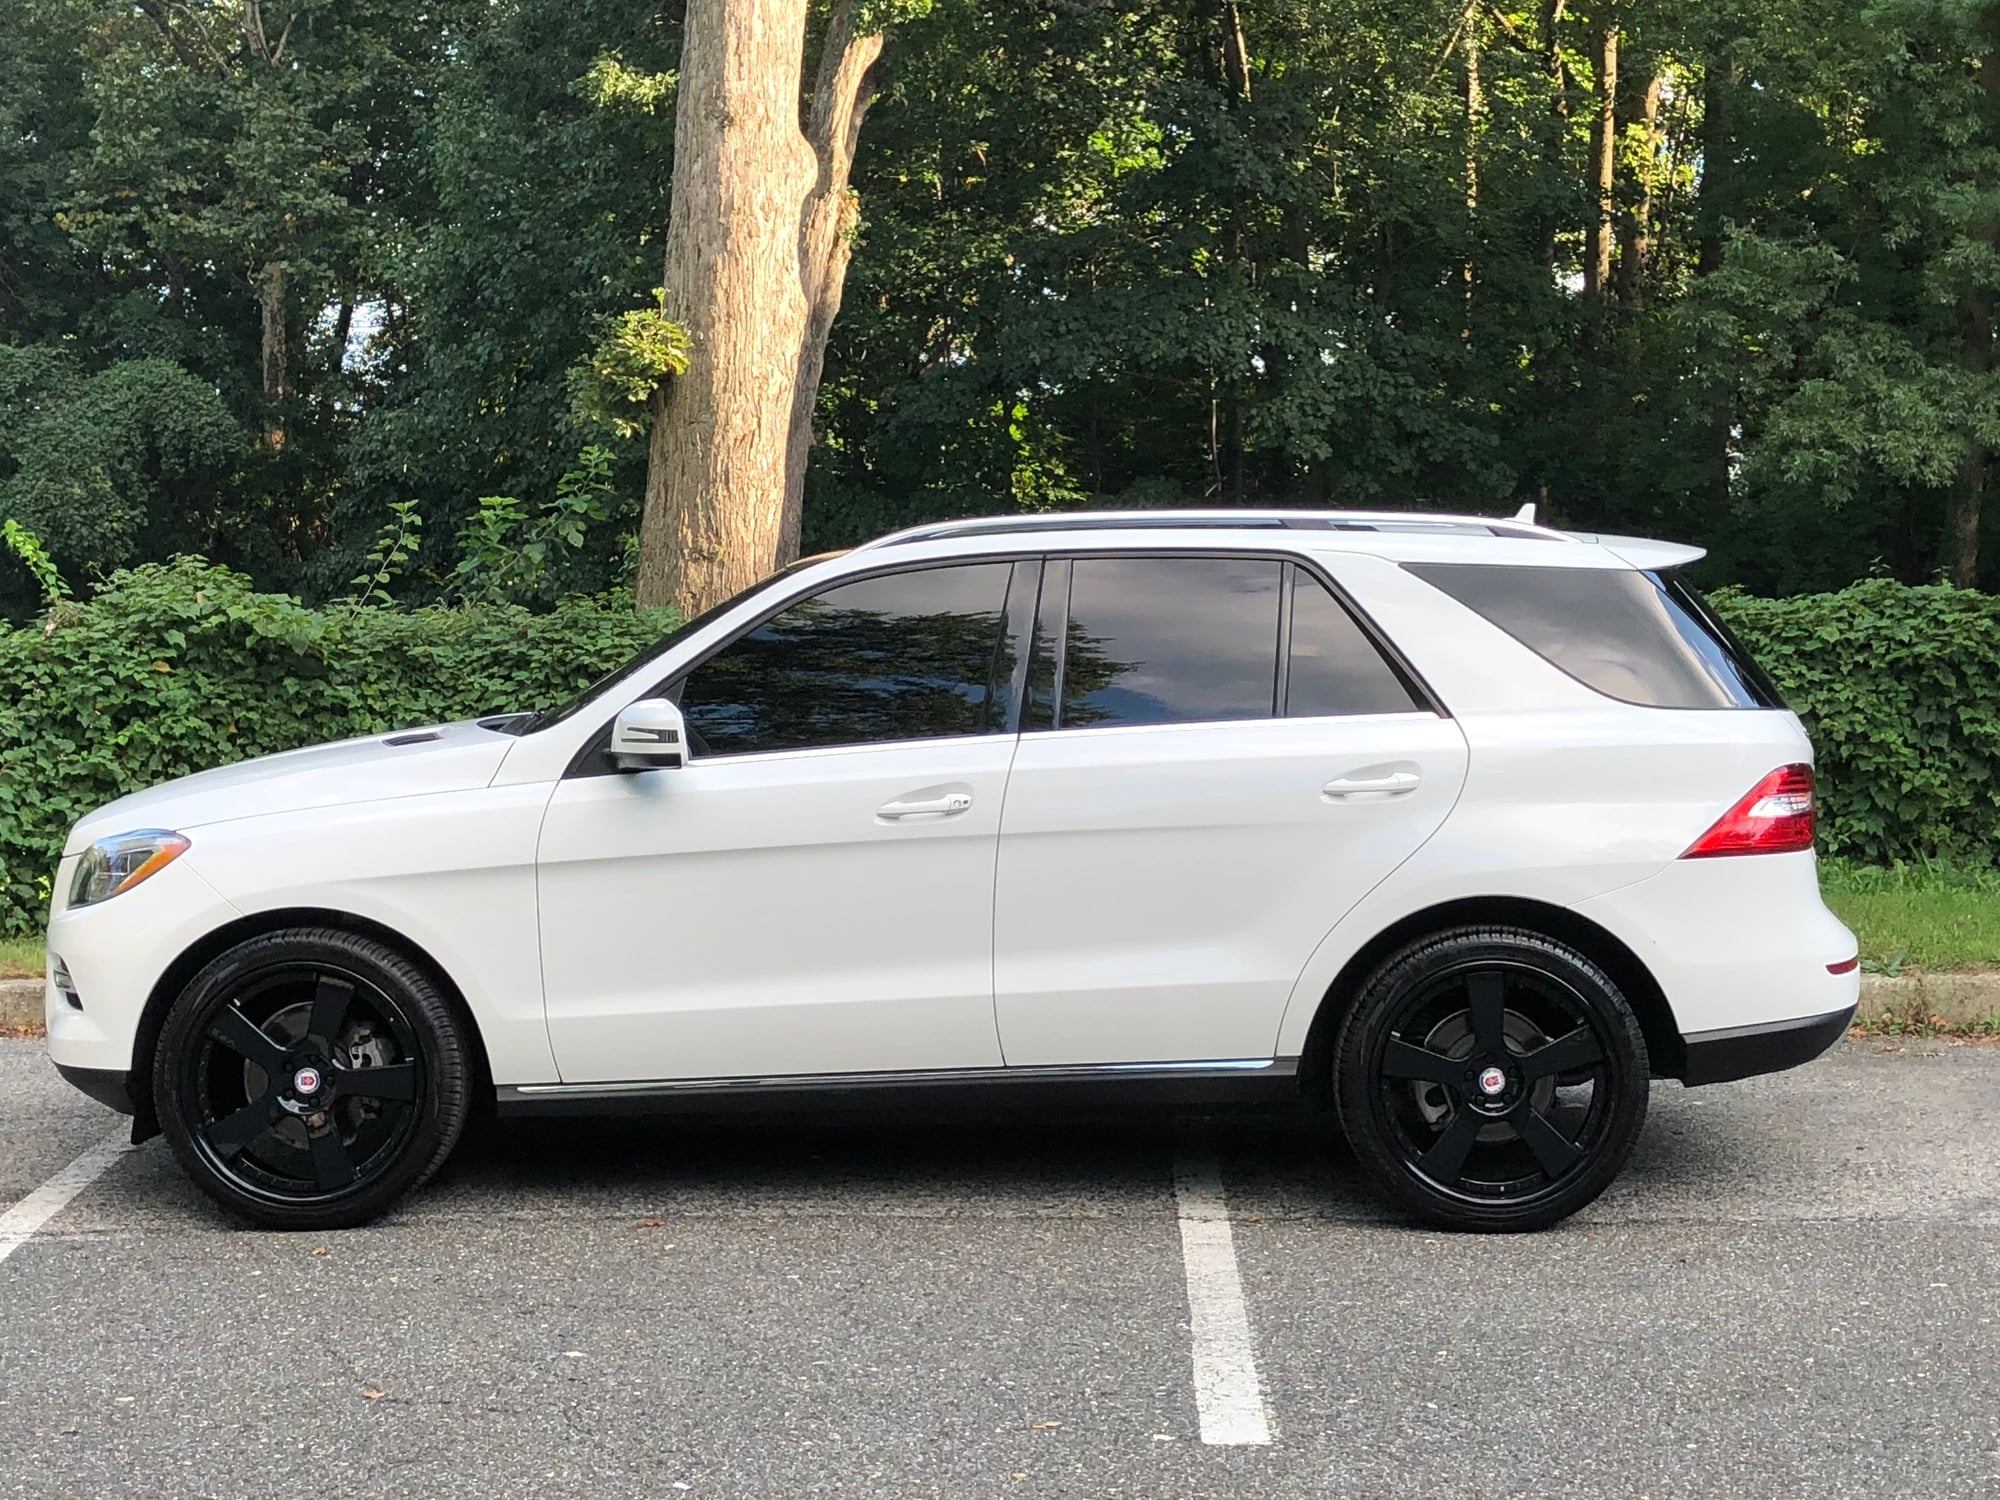 Wheels and Tires/Axles - 22 inch HRE 945 RL 22x9 265/35/22 All Season - Used - 2012 to 2015 Mercedes-Benz ML350 - 2015 to 2019 Mercedes-Benz GLE350 - Yonkers, NY 10710, United States